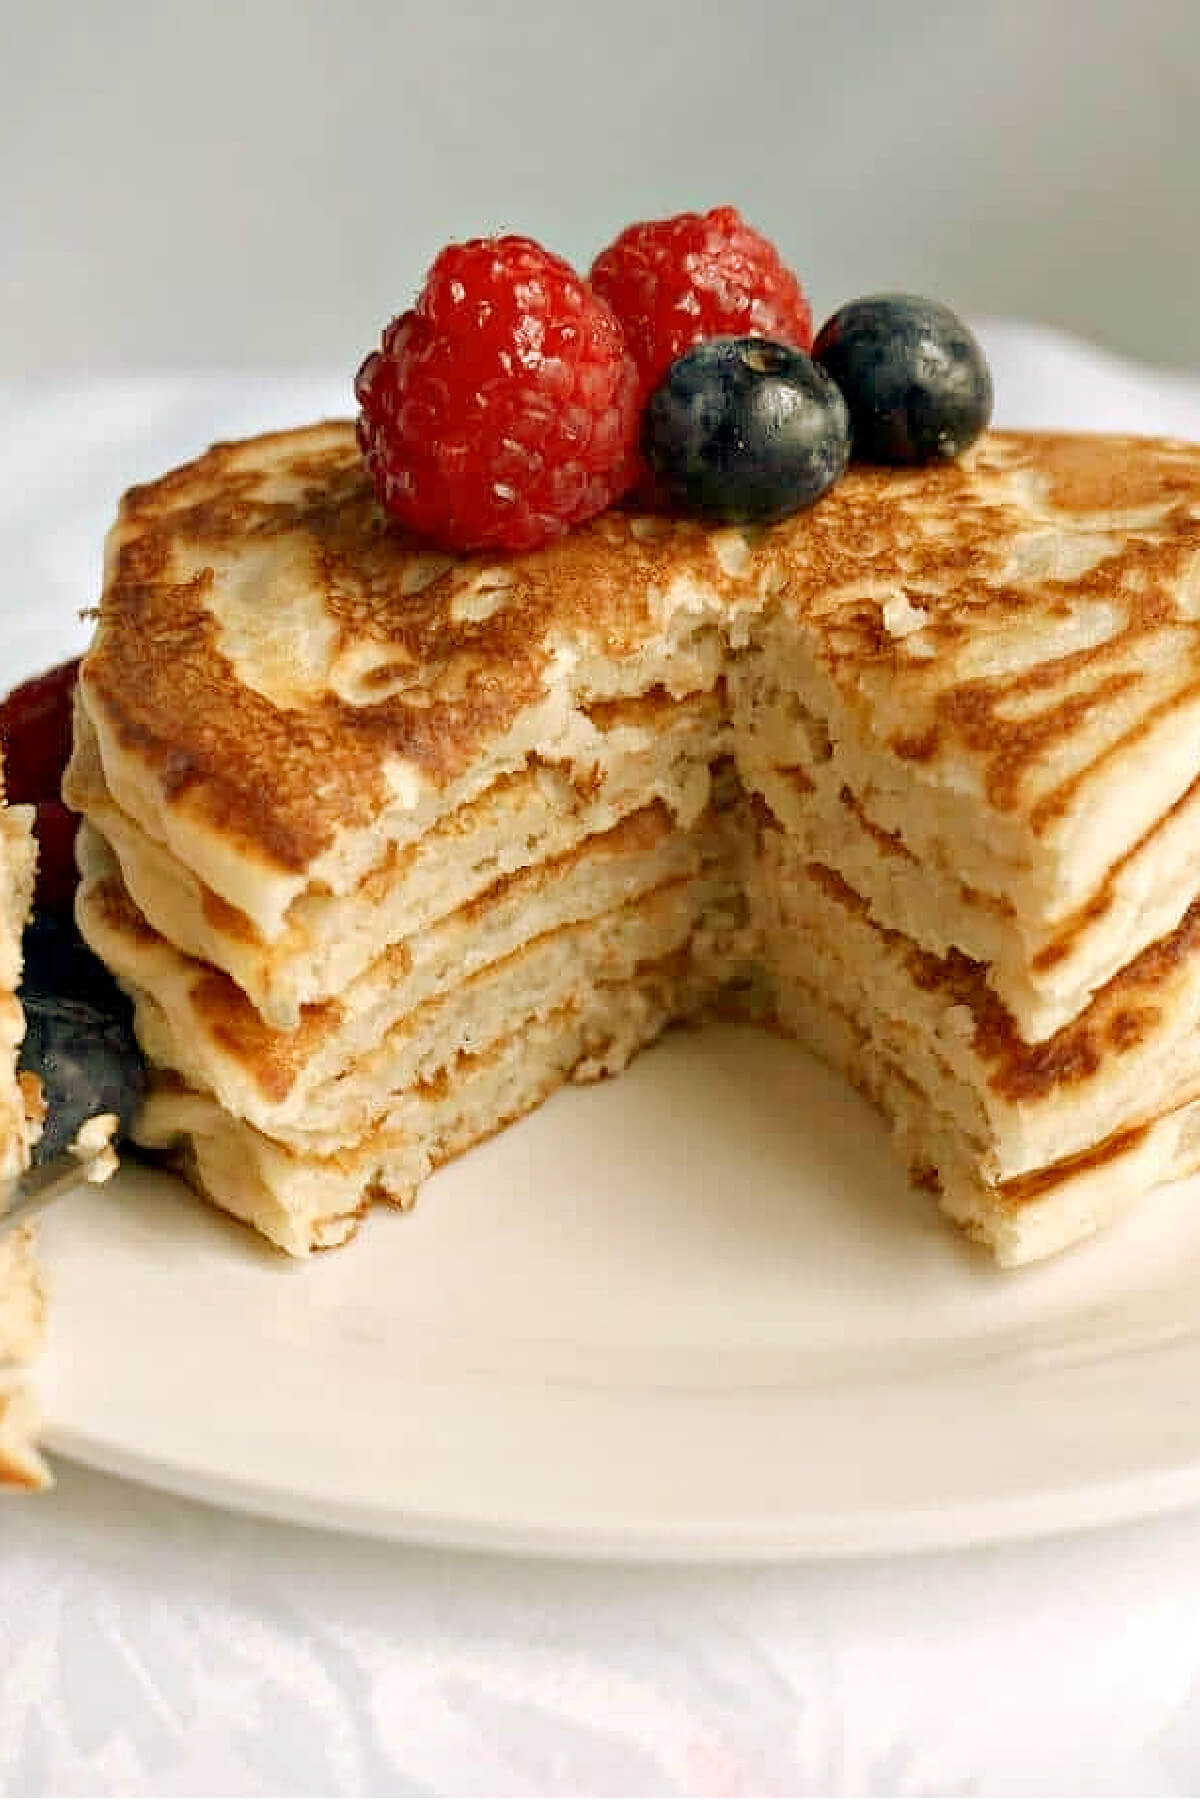 A pile of pancakes cut into, and topped with berries.